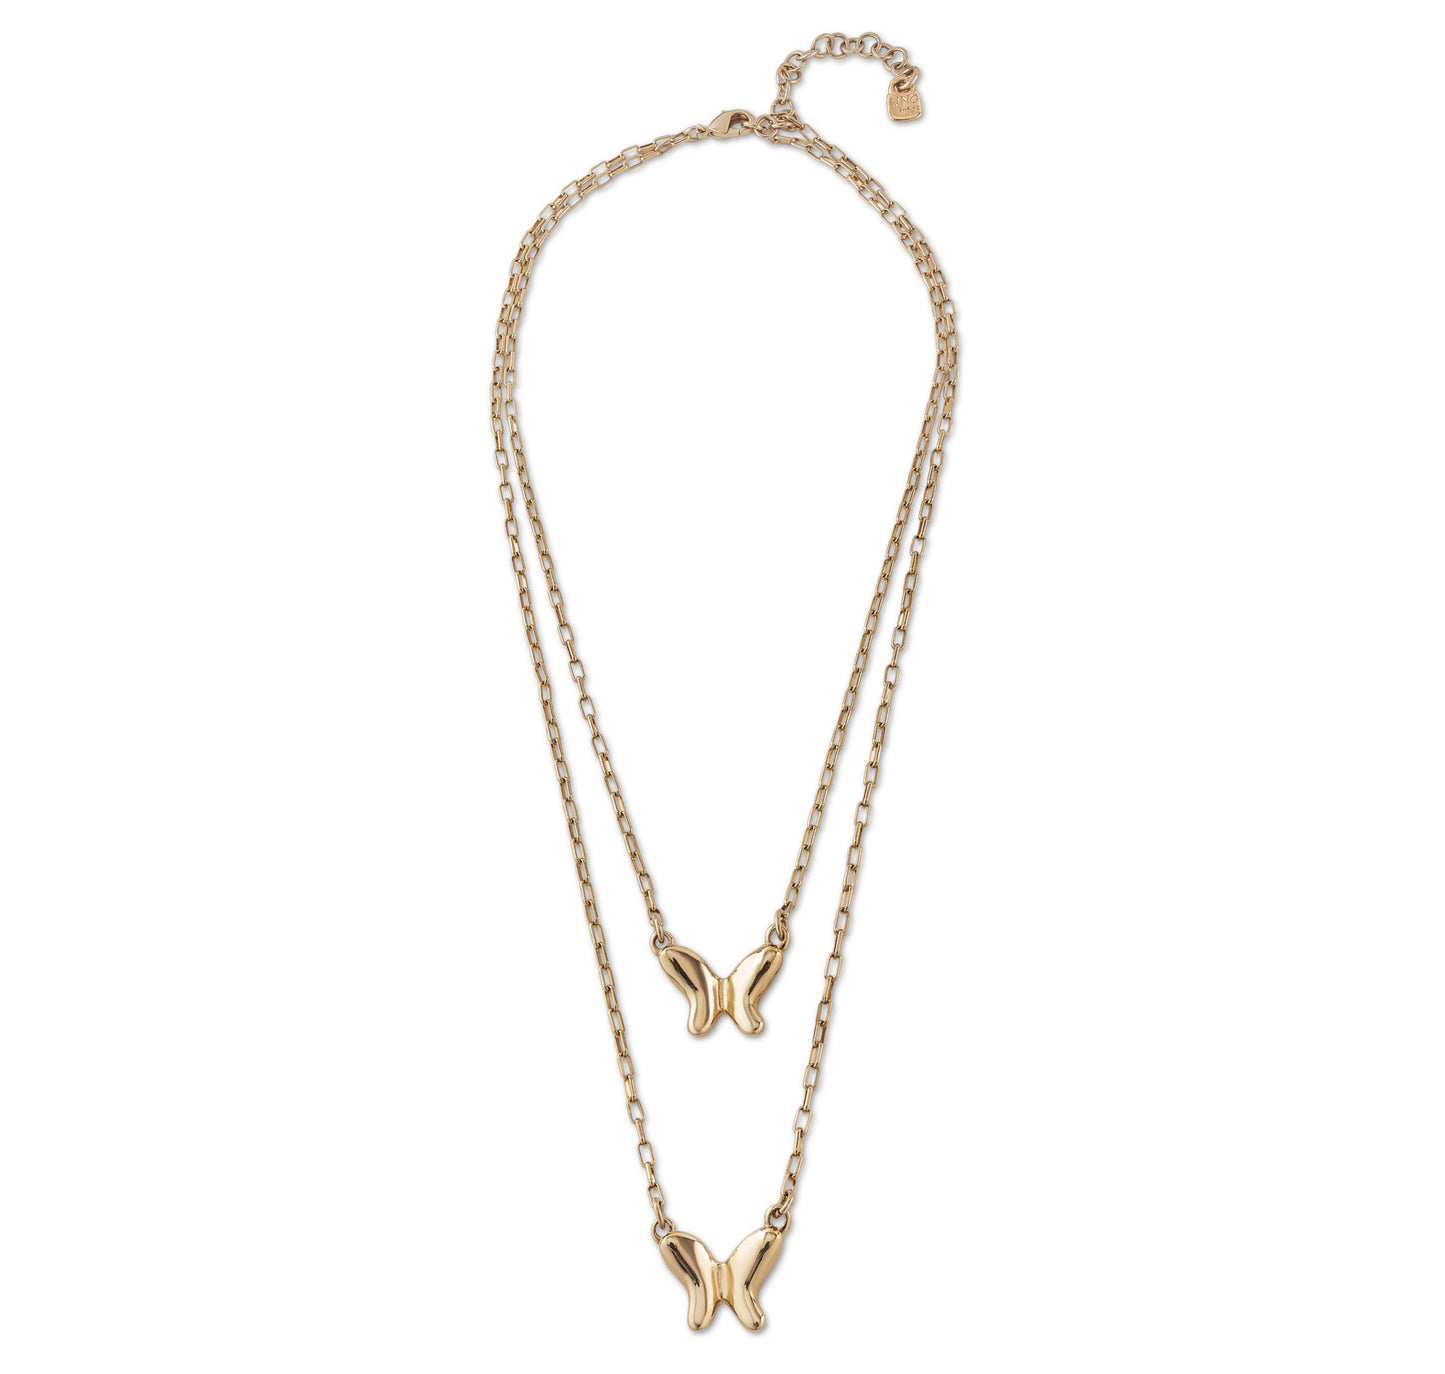 Doublefly Necklace | Uno de 50 | Luby 